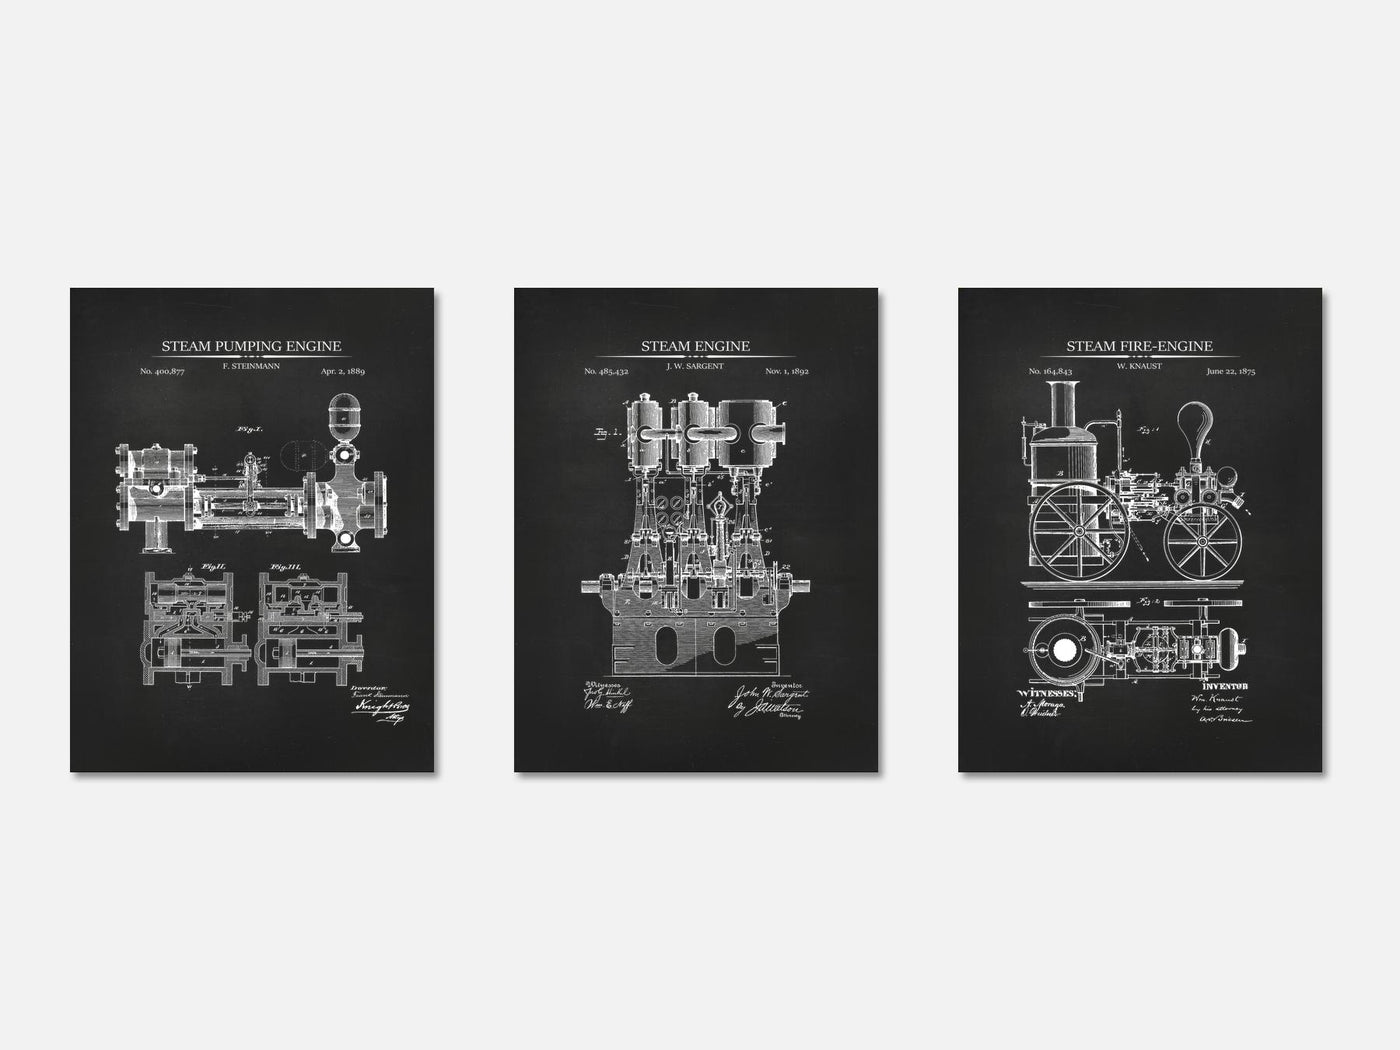 Steam Engines - Patent Print Set of 3 mockup - A_t10119-V1-PC_AP-SS_3-PS_11x14-C_cha variant